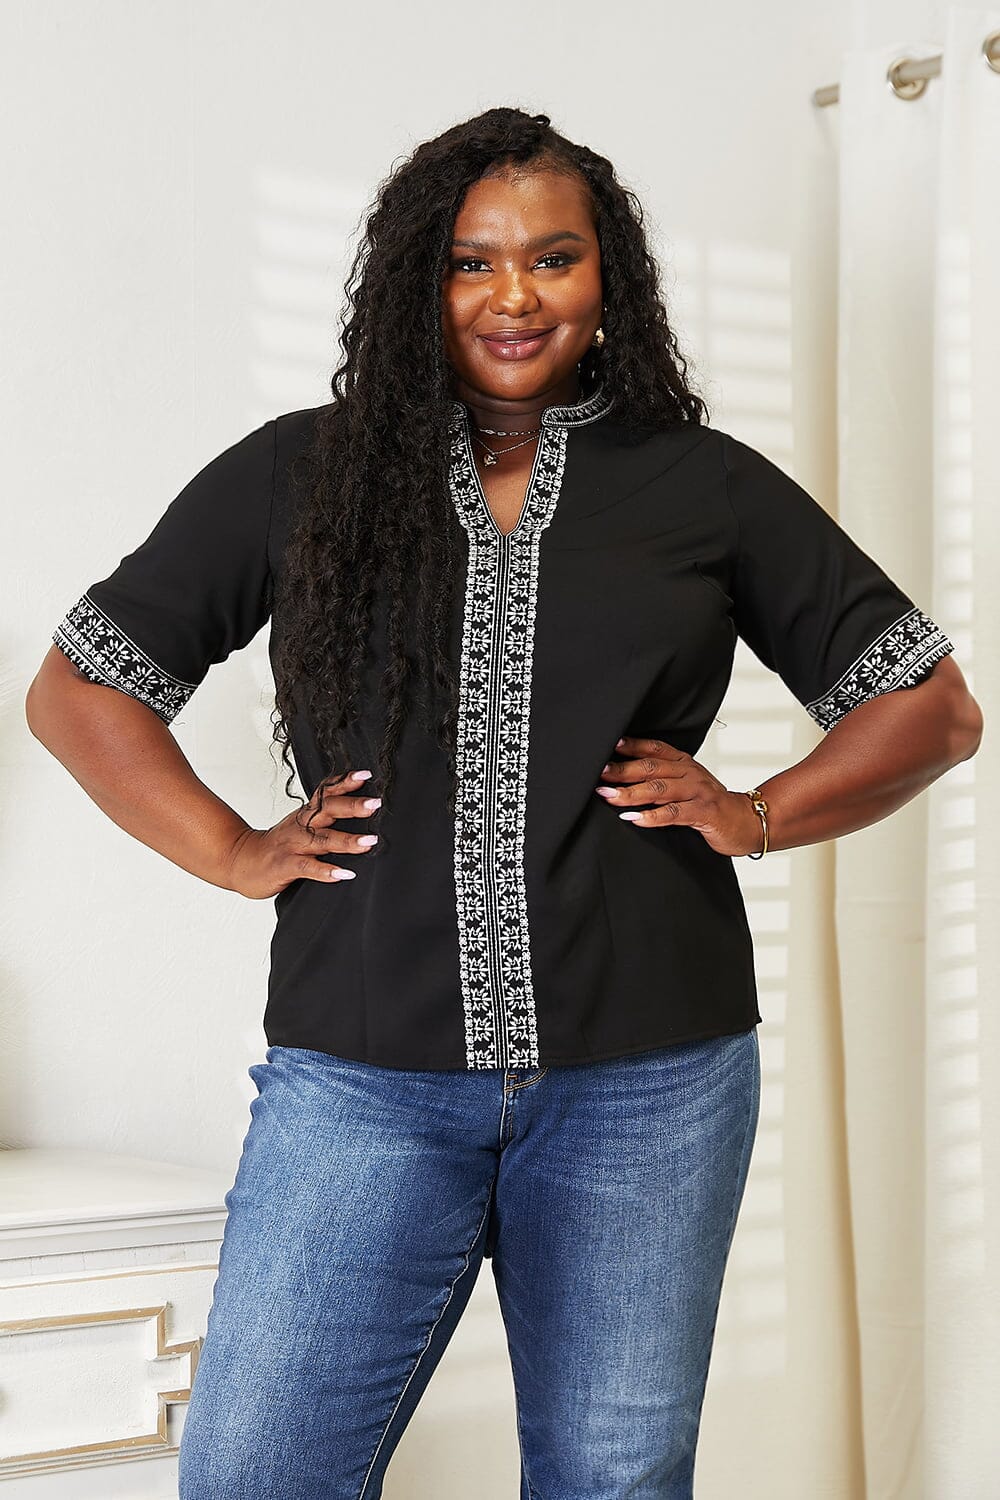 Double Take Black Embroidered Notched Neck Top Shirts & Tops jehouze 